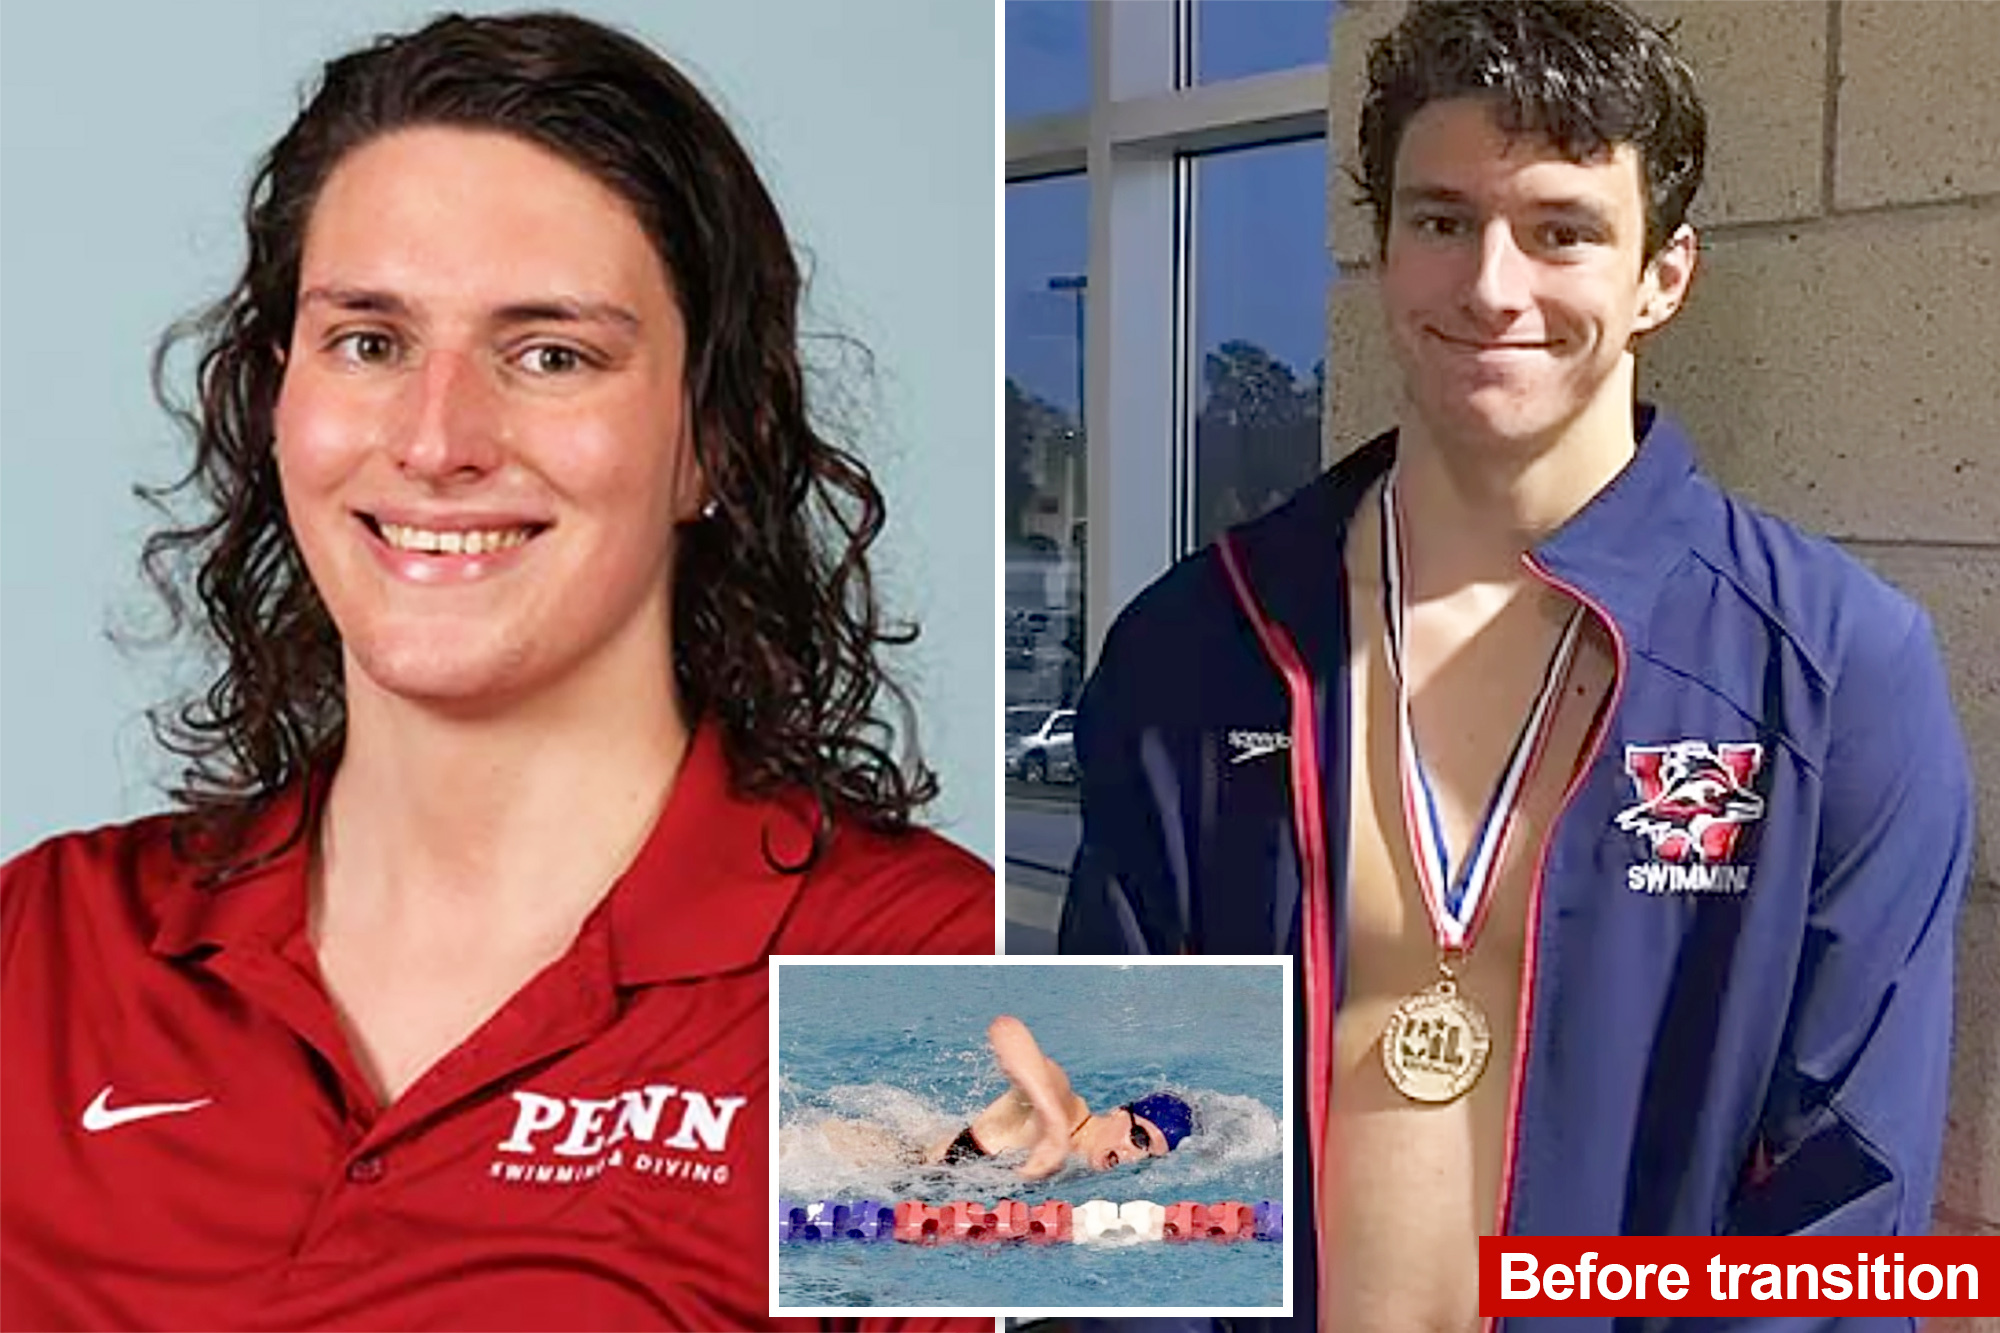 Female swimmer says she has "no choice" but to change in locker room with male "Lia" Thomas